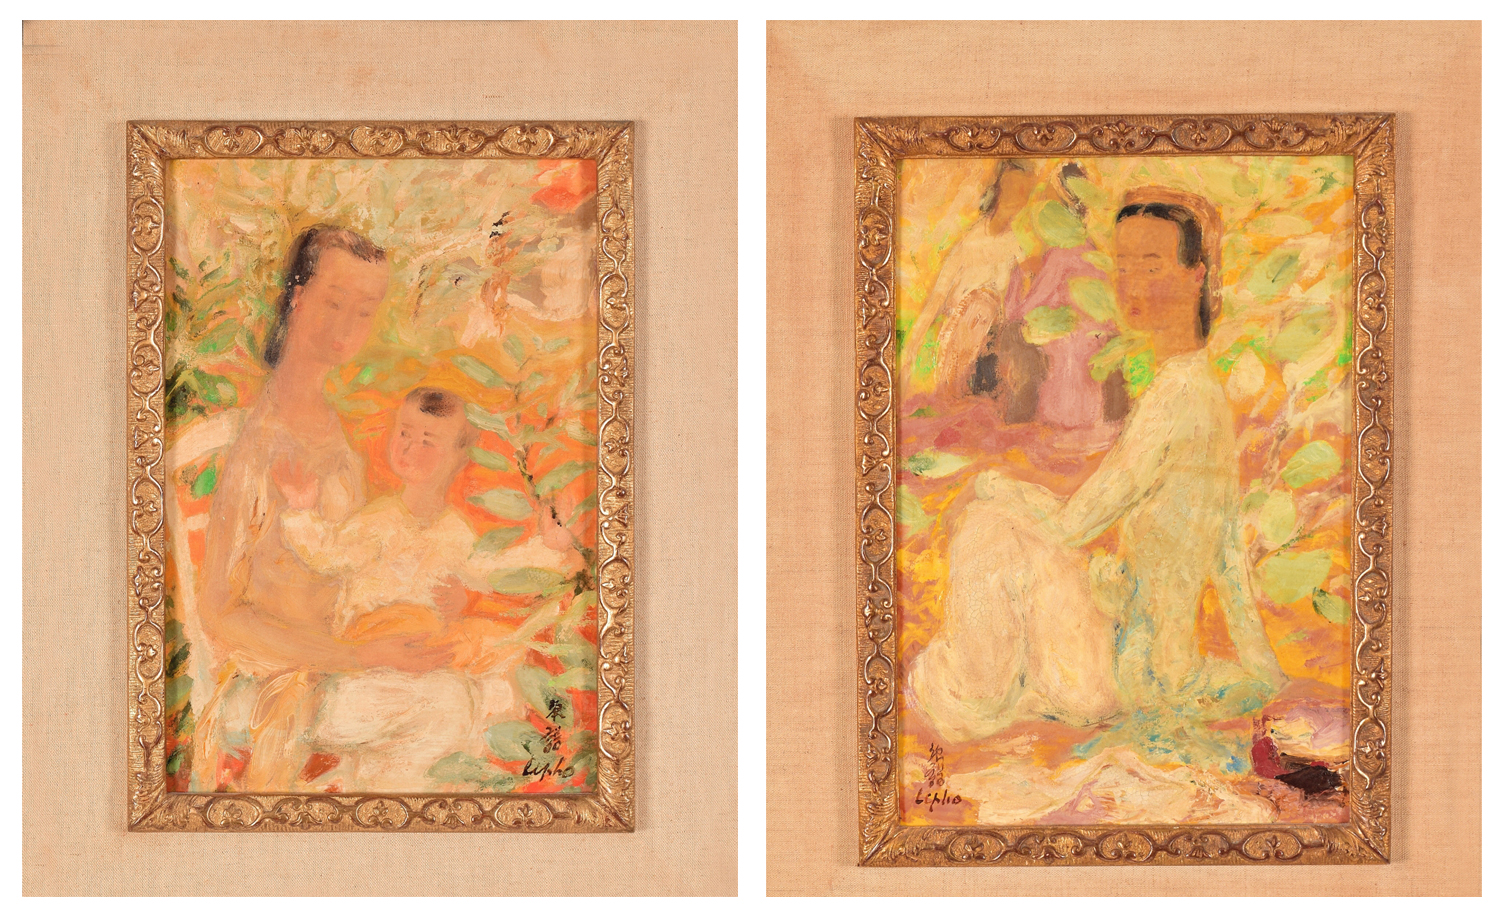 Two paintings by Vietnamese artist Le Pho (1907-2001), both of which had been collected from a Paris gallery, brought $35,000 and $33,000, respectively from the same bidder. They were “Dans le Jardin,” left, an original oil on linen canvas or silk mounted on Masonite, depicting girls in a garden, and “Mere et Enfant,” or Mother and Child in a Garden. Together, they added $82,960 to Tremont’s gross.